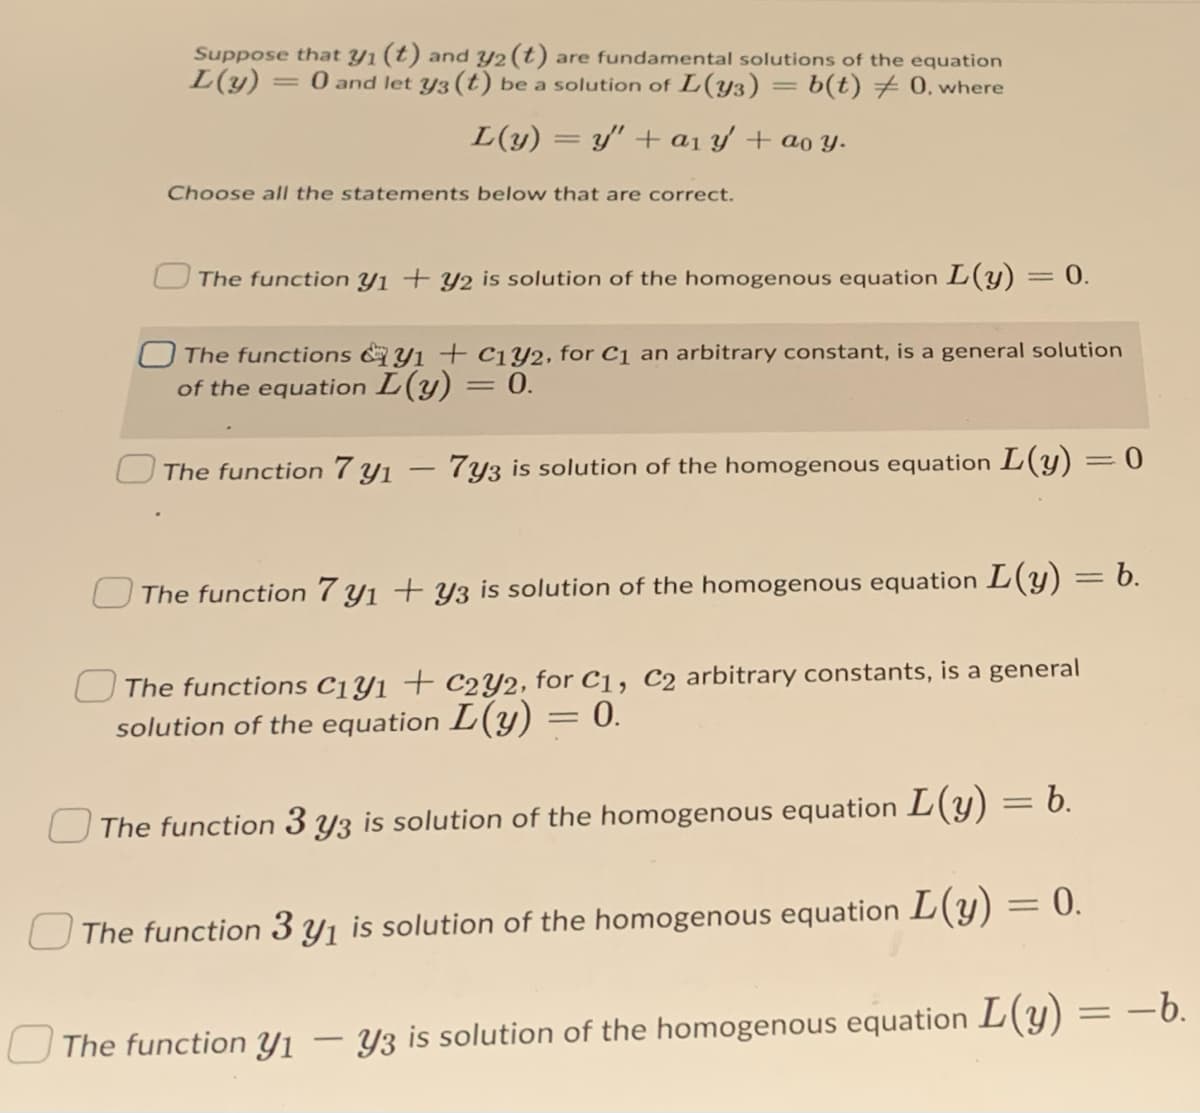 Suppose that y1 (t) and y2 (t) are fundamental solutions of the equation
L(y)
= 0 and let y3 (t) be a solution of L(y3) = b(t) 0, where
L(y) = y' + a1 y + ao y.
Choose all the statements below that are correct.
The function Y1 + y2 is solution of the homogenous equation L(Y)
0.
The functions &y1 + c1Y2, for C1 an arbitrary constant, is a general solution
of the equation L(y) = 0.
The function 7 yı – 7y3 is solution of the homogenous equation L(y) = 0
U The function 7 y1 + Y3 is solution of the homogenous equation L(y) = b.
The functions C1Y1 + C2Y2, for C1, C2 arbitrary constants, is a general
solution of the equation L(y) = 0.
The function 3 y3 is solution of the homogenous equation L(y) = b.
U The function 3 y1 is solution of the homogenous equation L(y) = 0.
The function Yı – Y3 is solution of the homogenous equation L(y) = –6.
